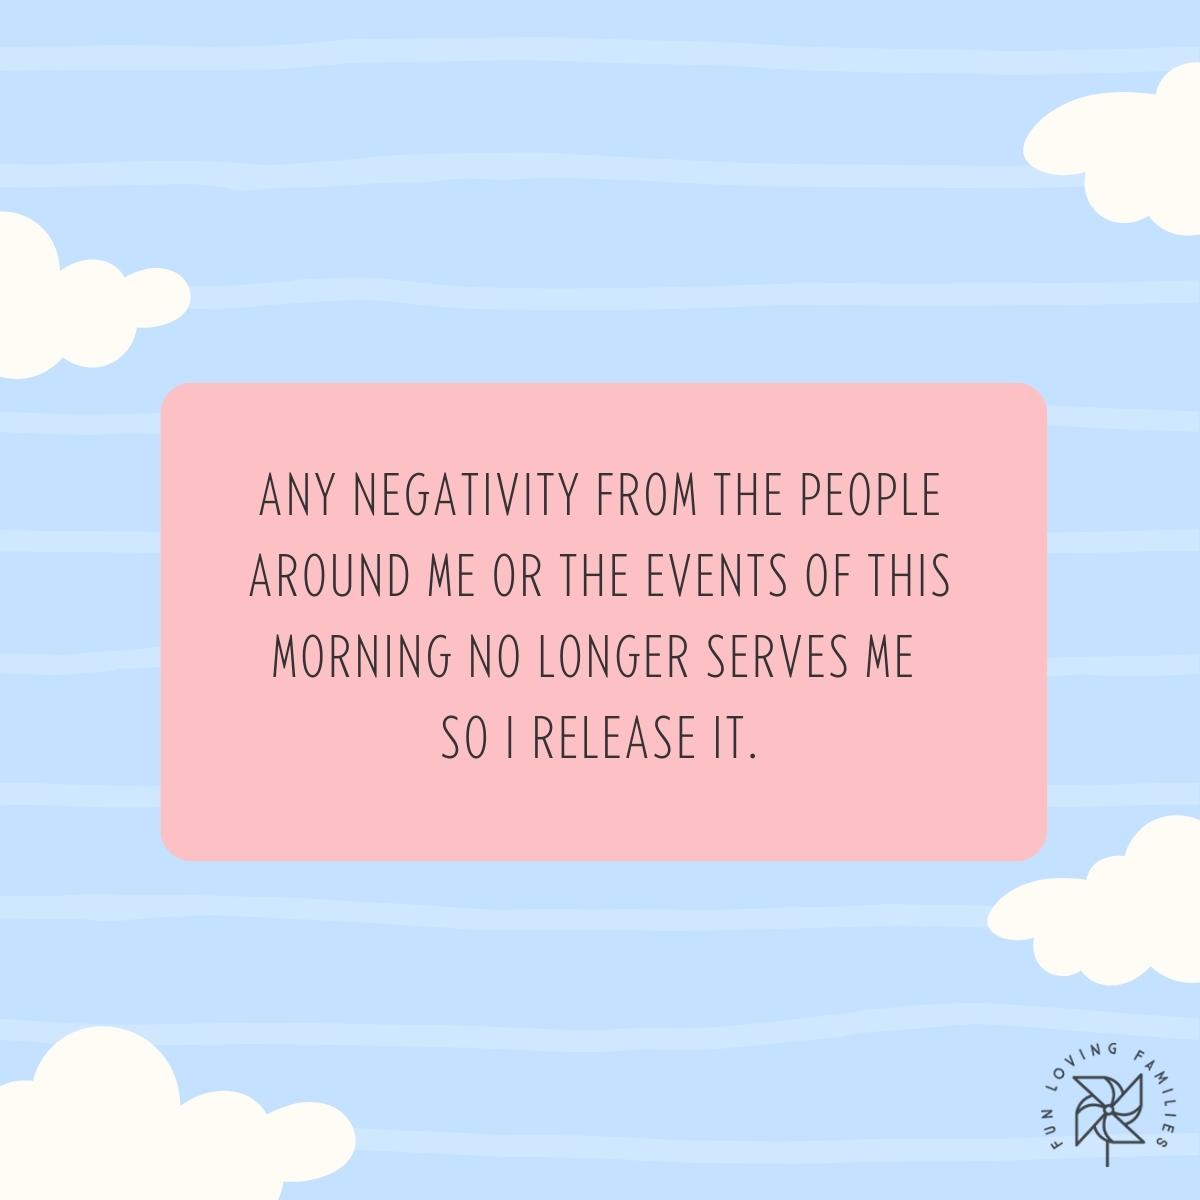 Any negativity from the people around me no longer serves me so I release it affirmation